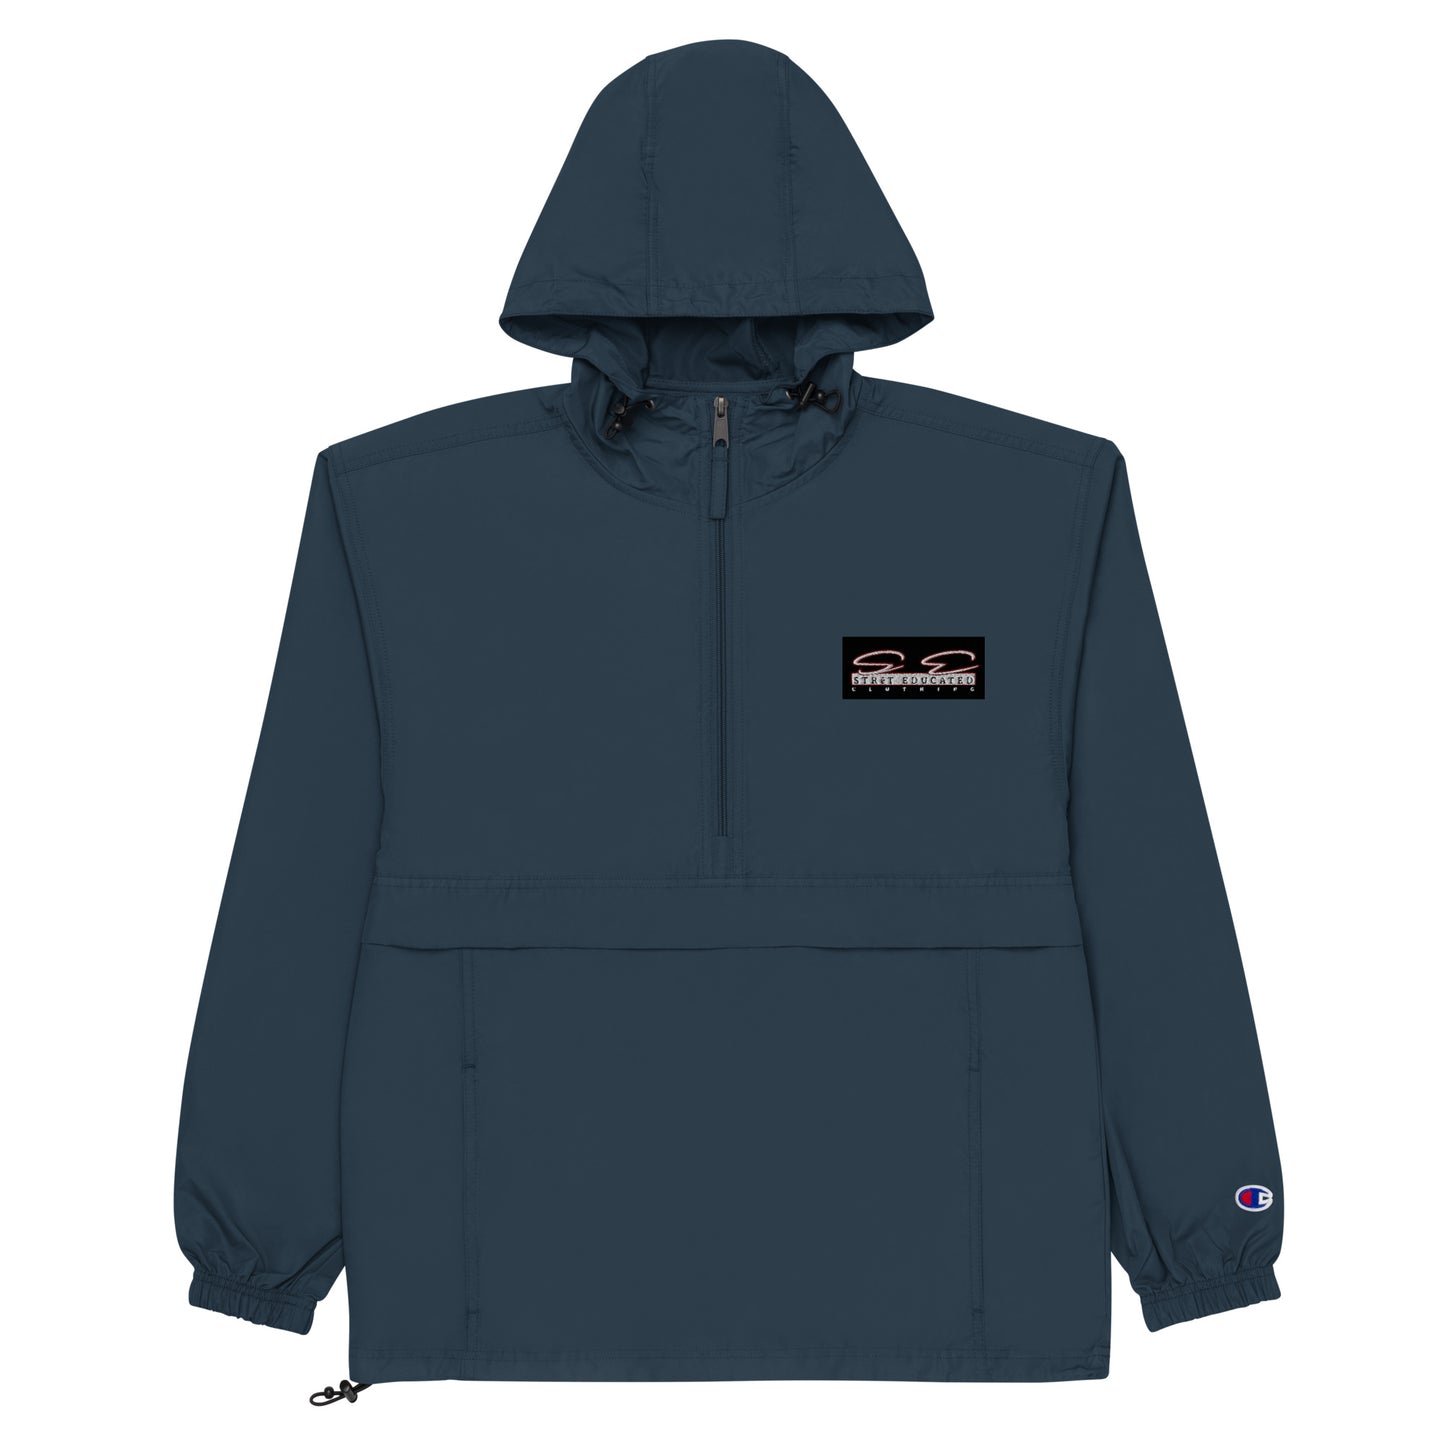 SE Embroidered Champion Packable Jacket